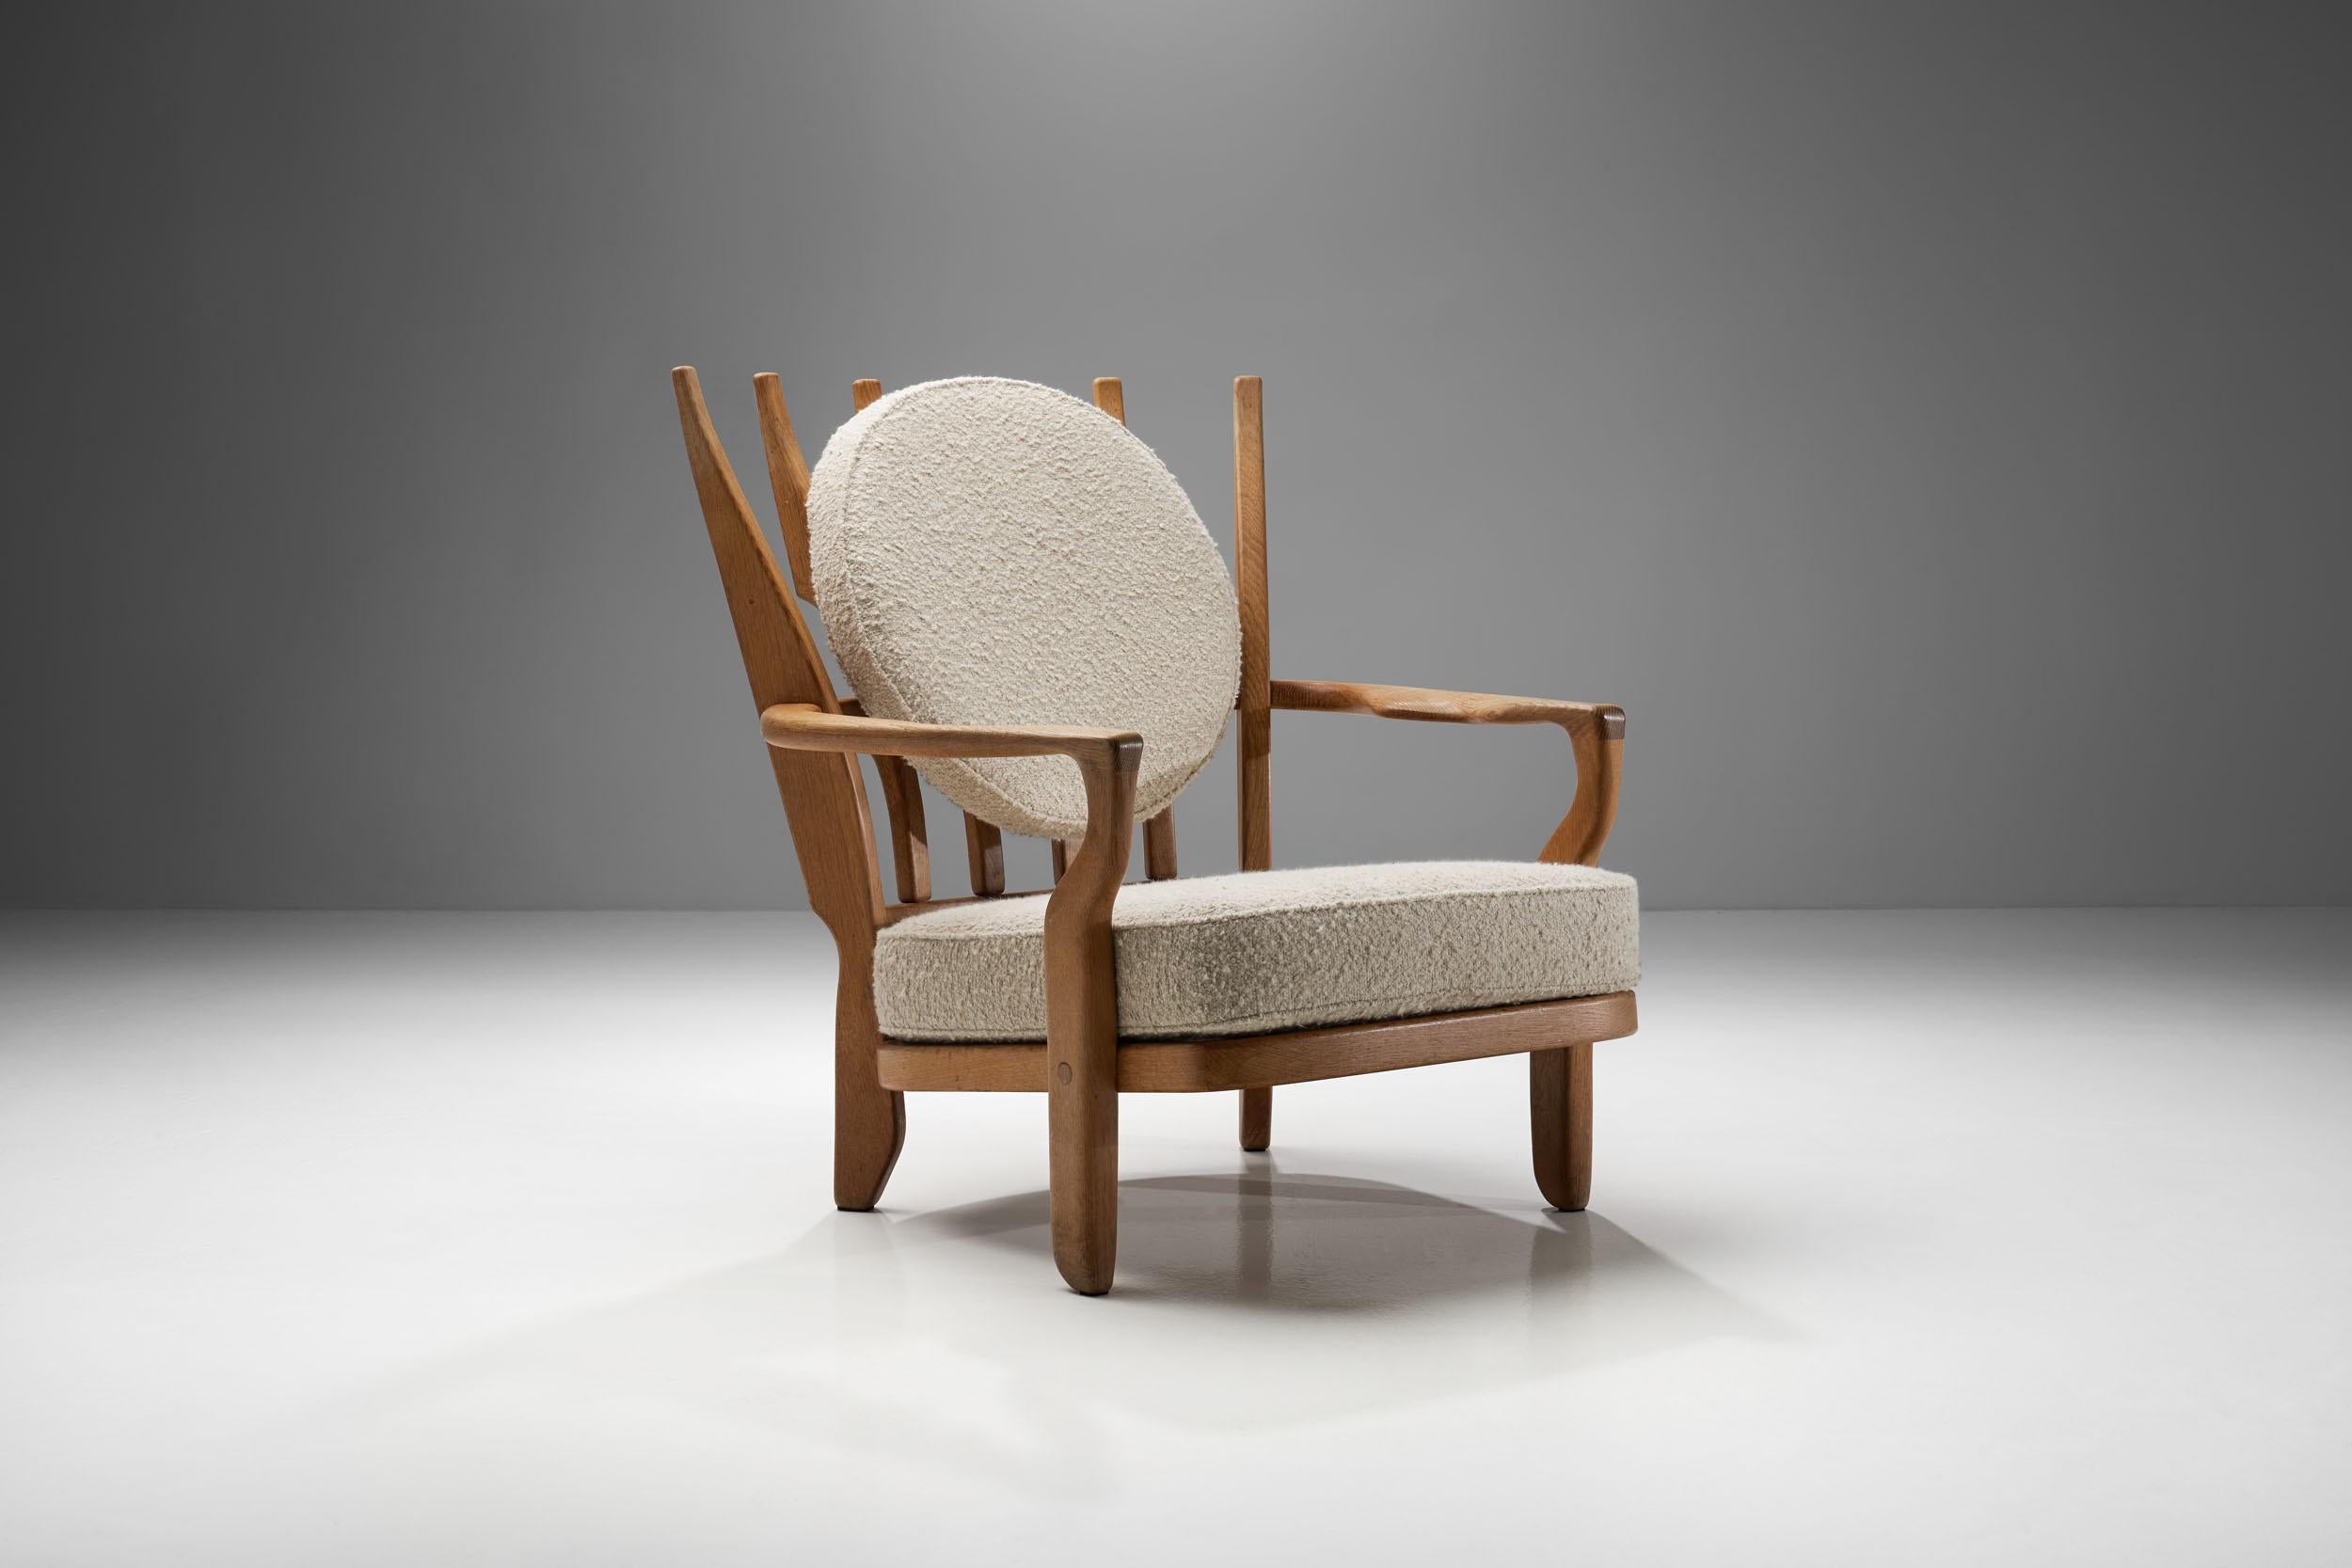 The Guillerme et Chambron ‘Juliette’ armchair display a beautiful contrast between the light wooden oak frame and the elegant sand colored fabric of the cushions. With a solid wooden frame, the support for the back is made with six wooden spindles